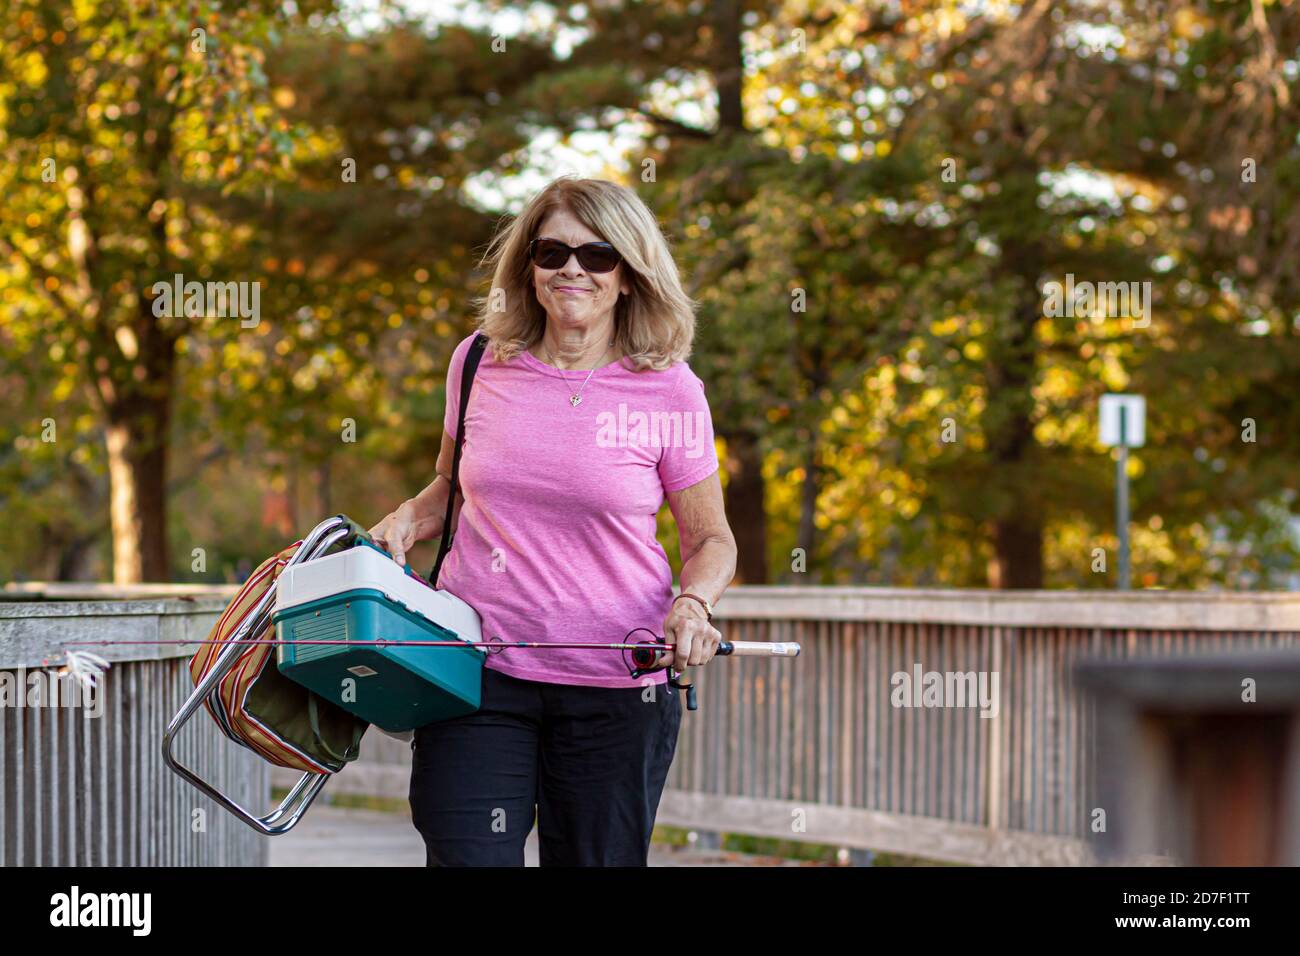 Frederick, MD, USA 10/14/2020: A middle aged caucasian woman with blonde  hair is going fishing alone in Baker Park. She has a fishing rod, a tackle  bo Stock Photo - Alamy